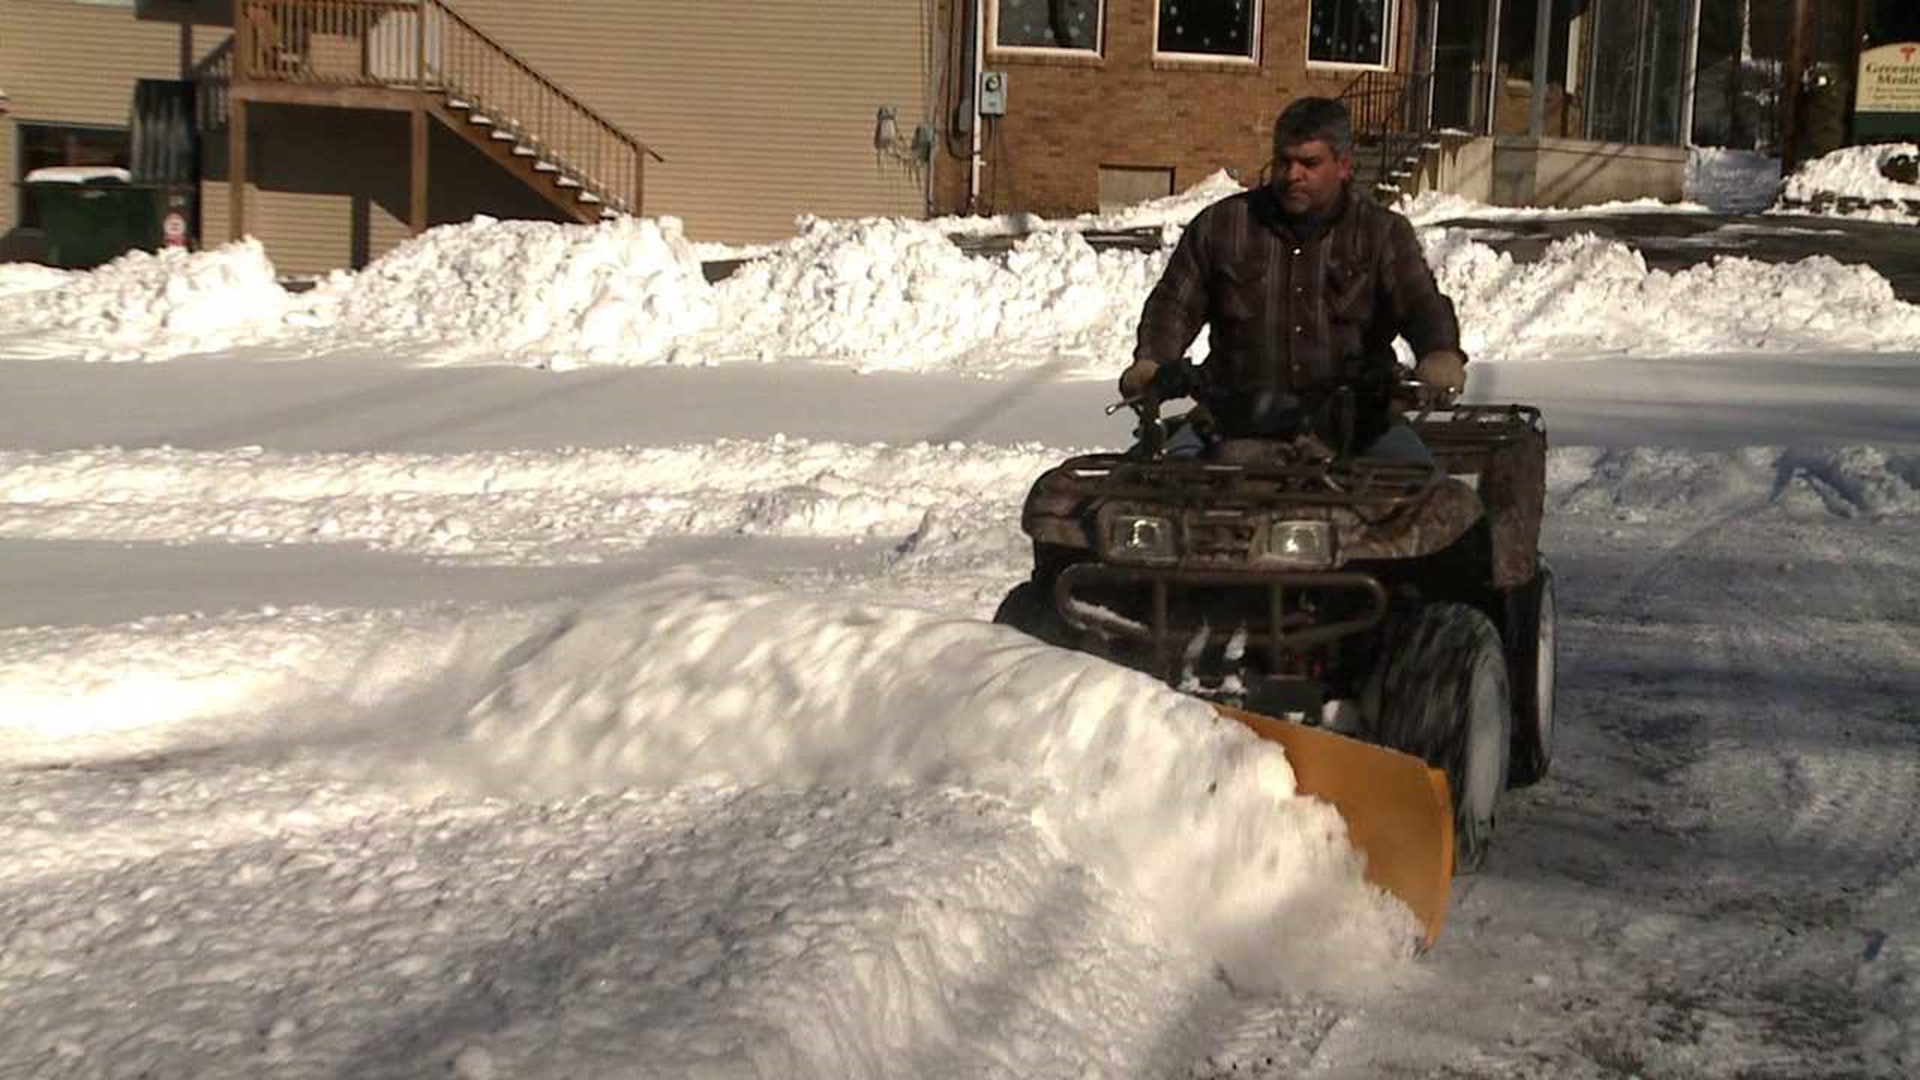 Residents Scramble with More Snow on the Way